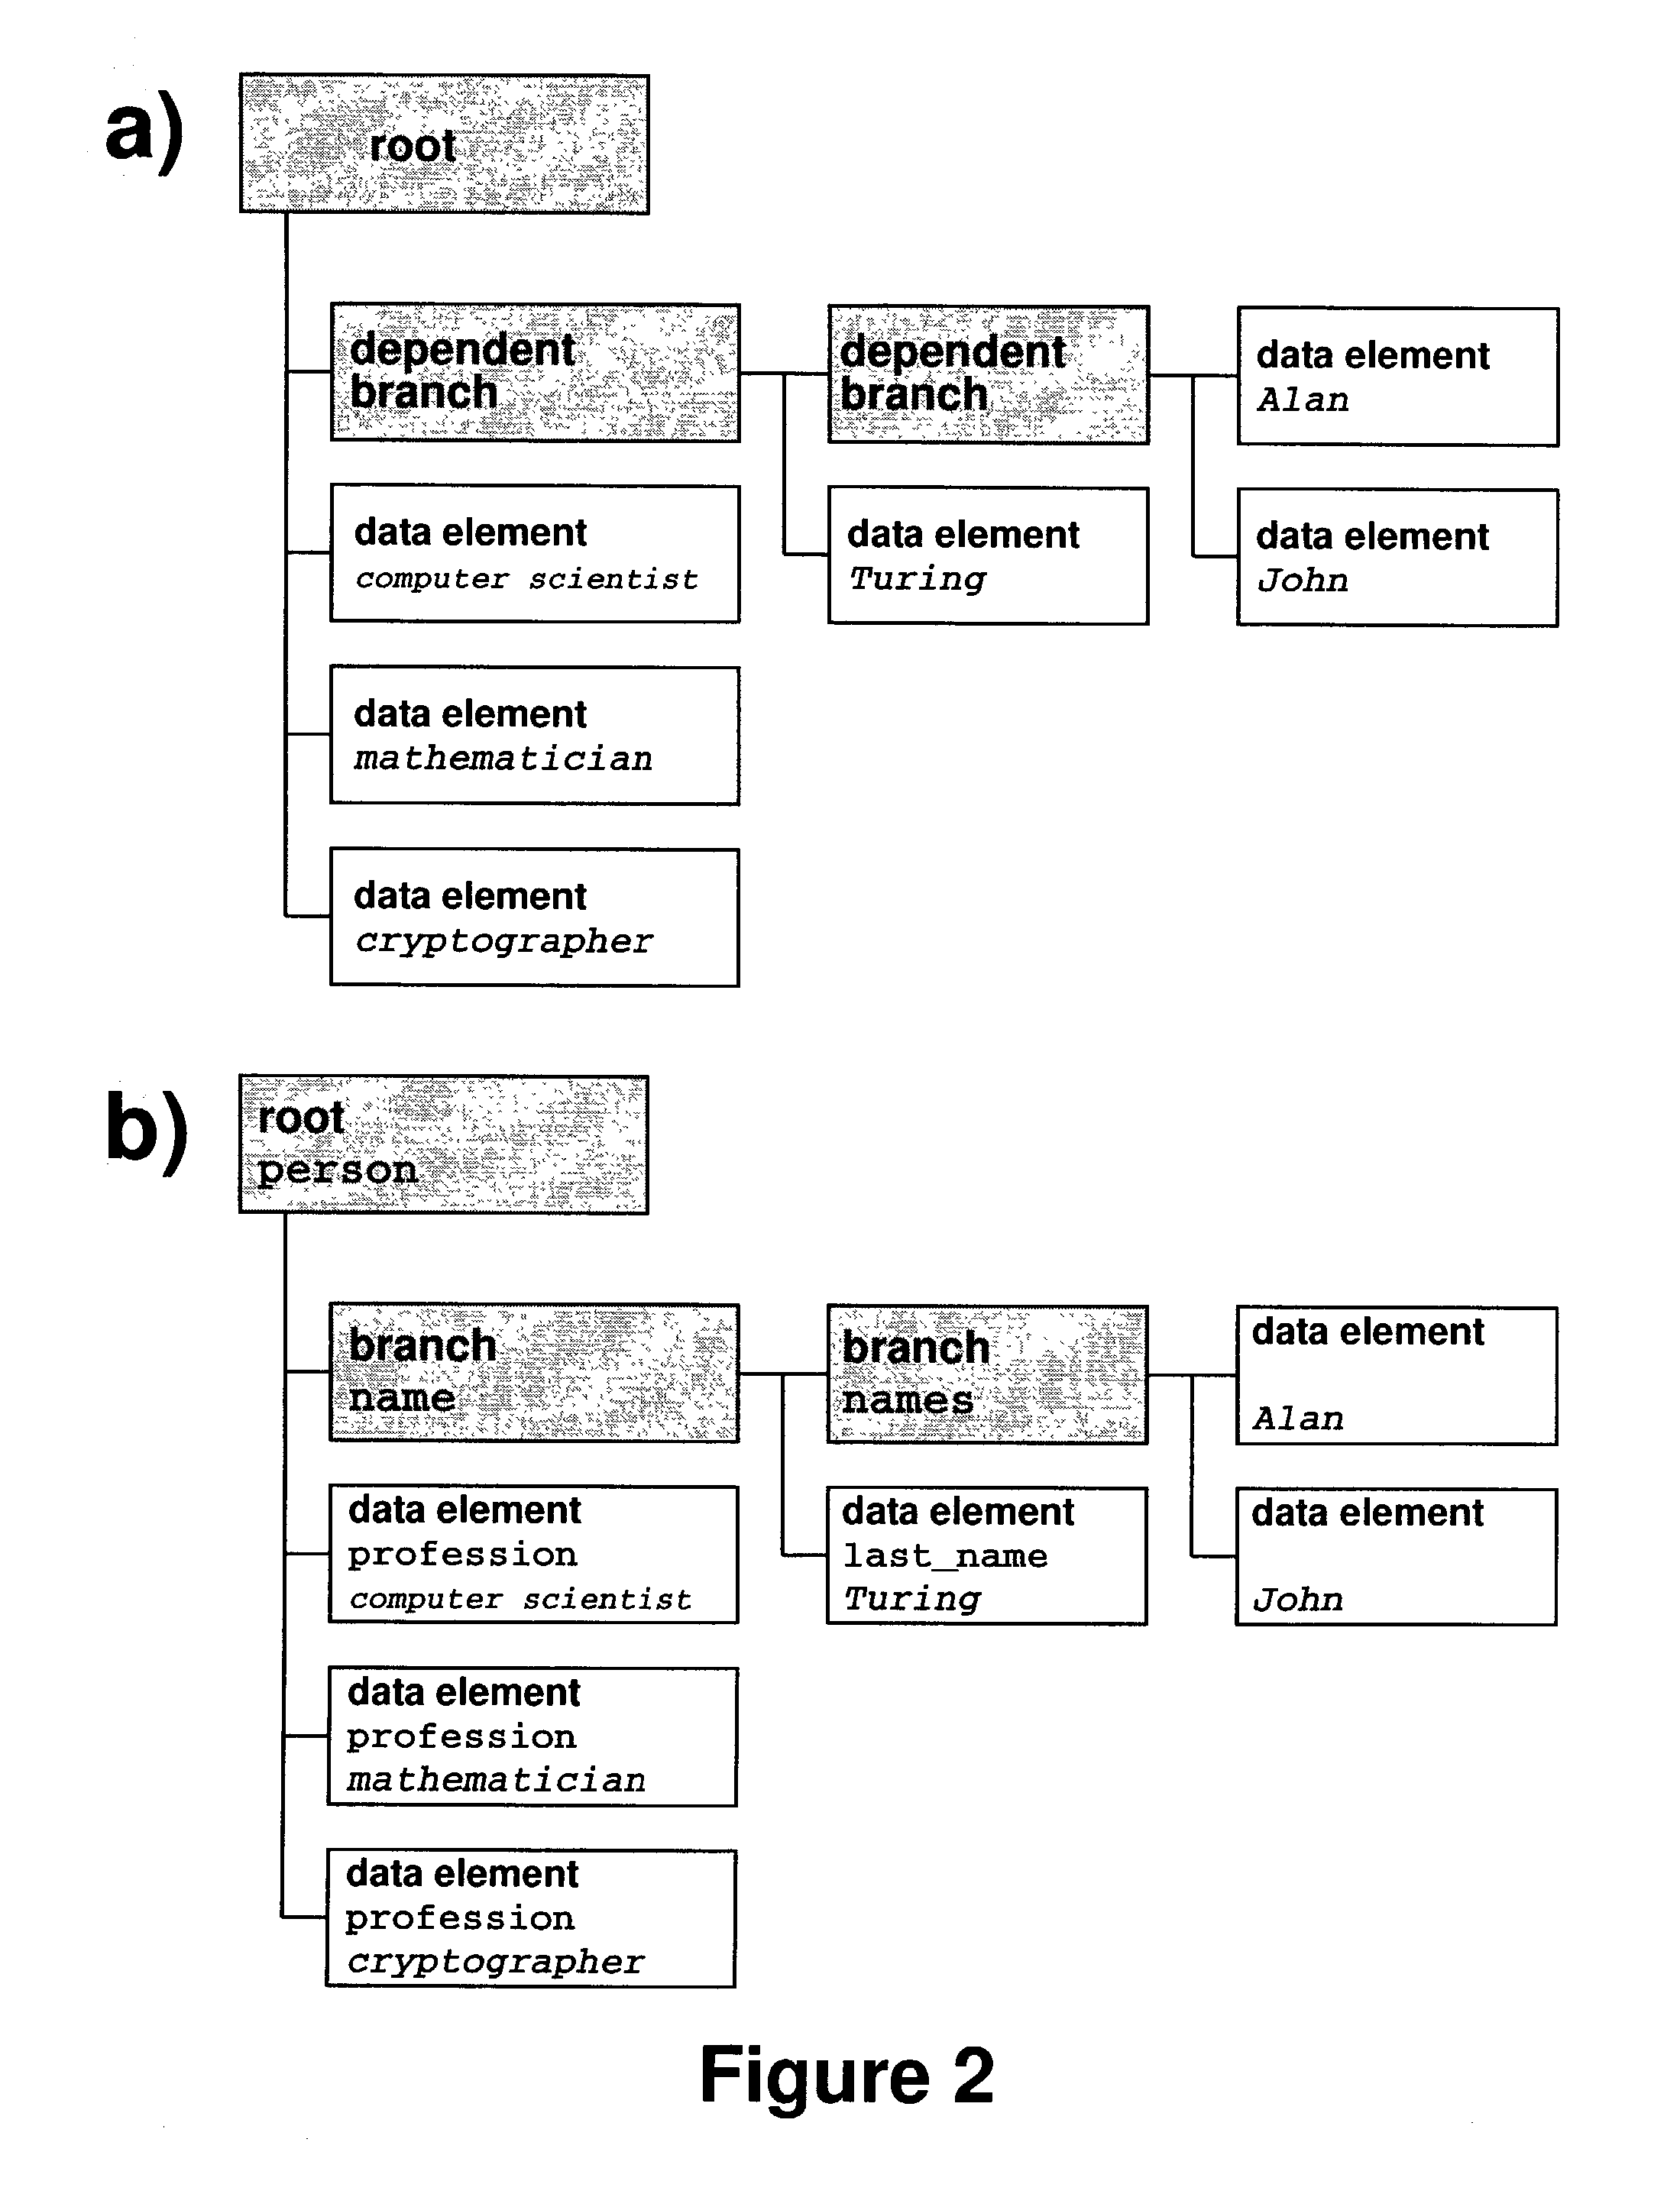 Efficient method to describe hierarchical data structures